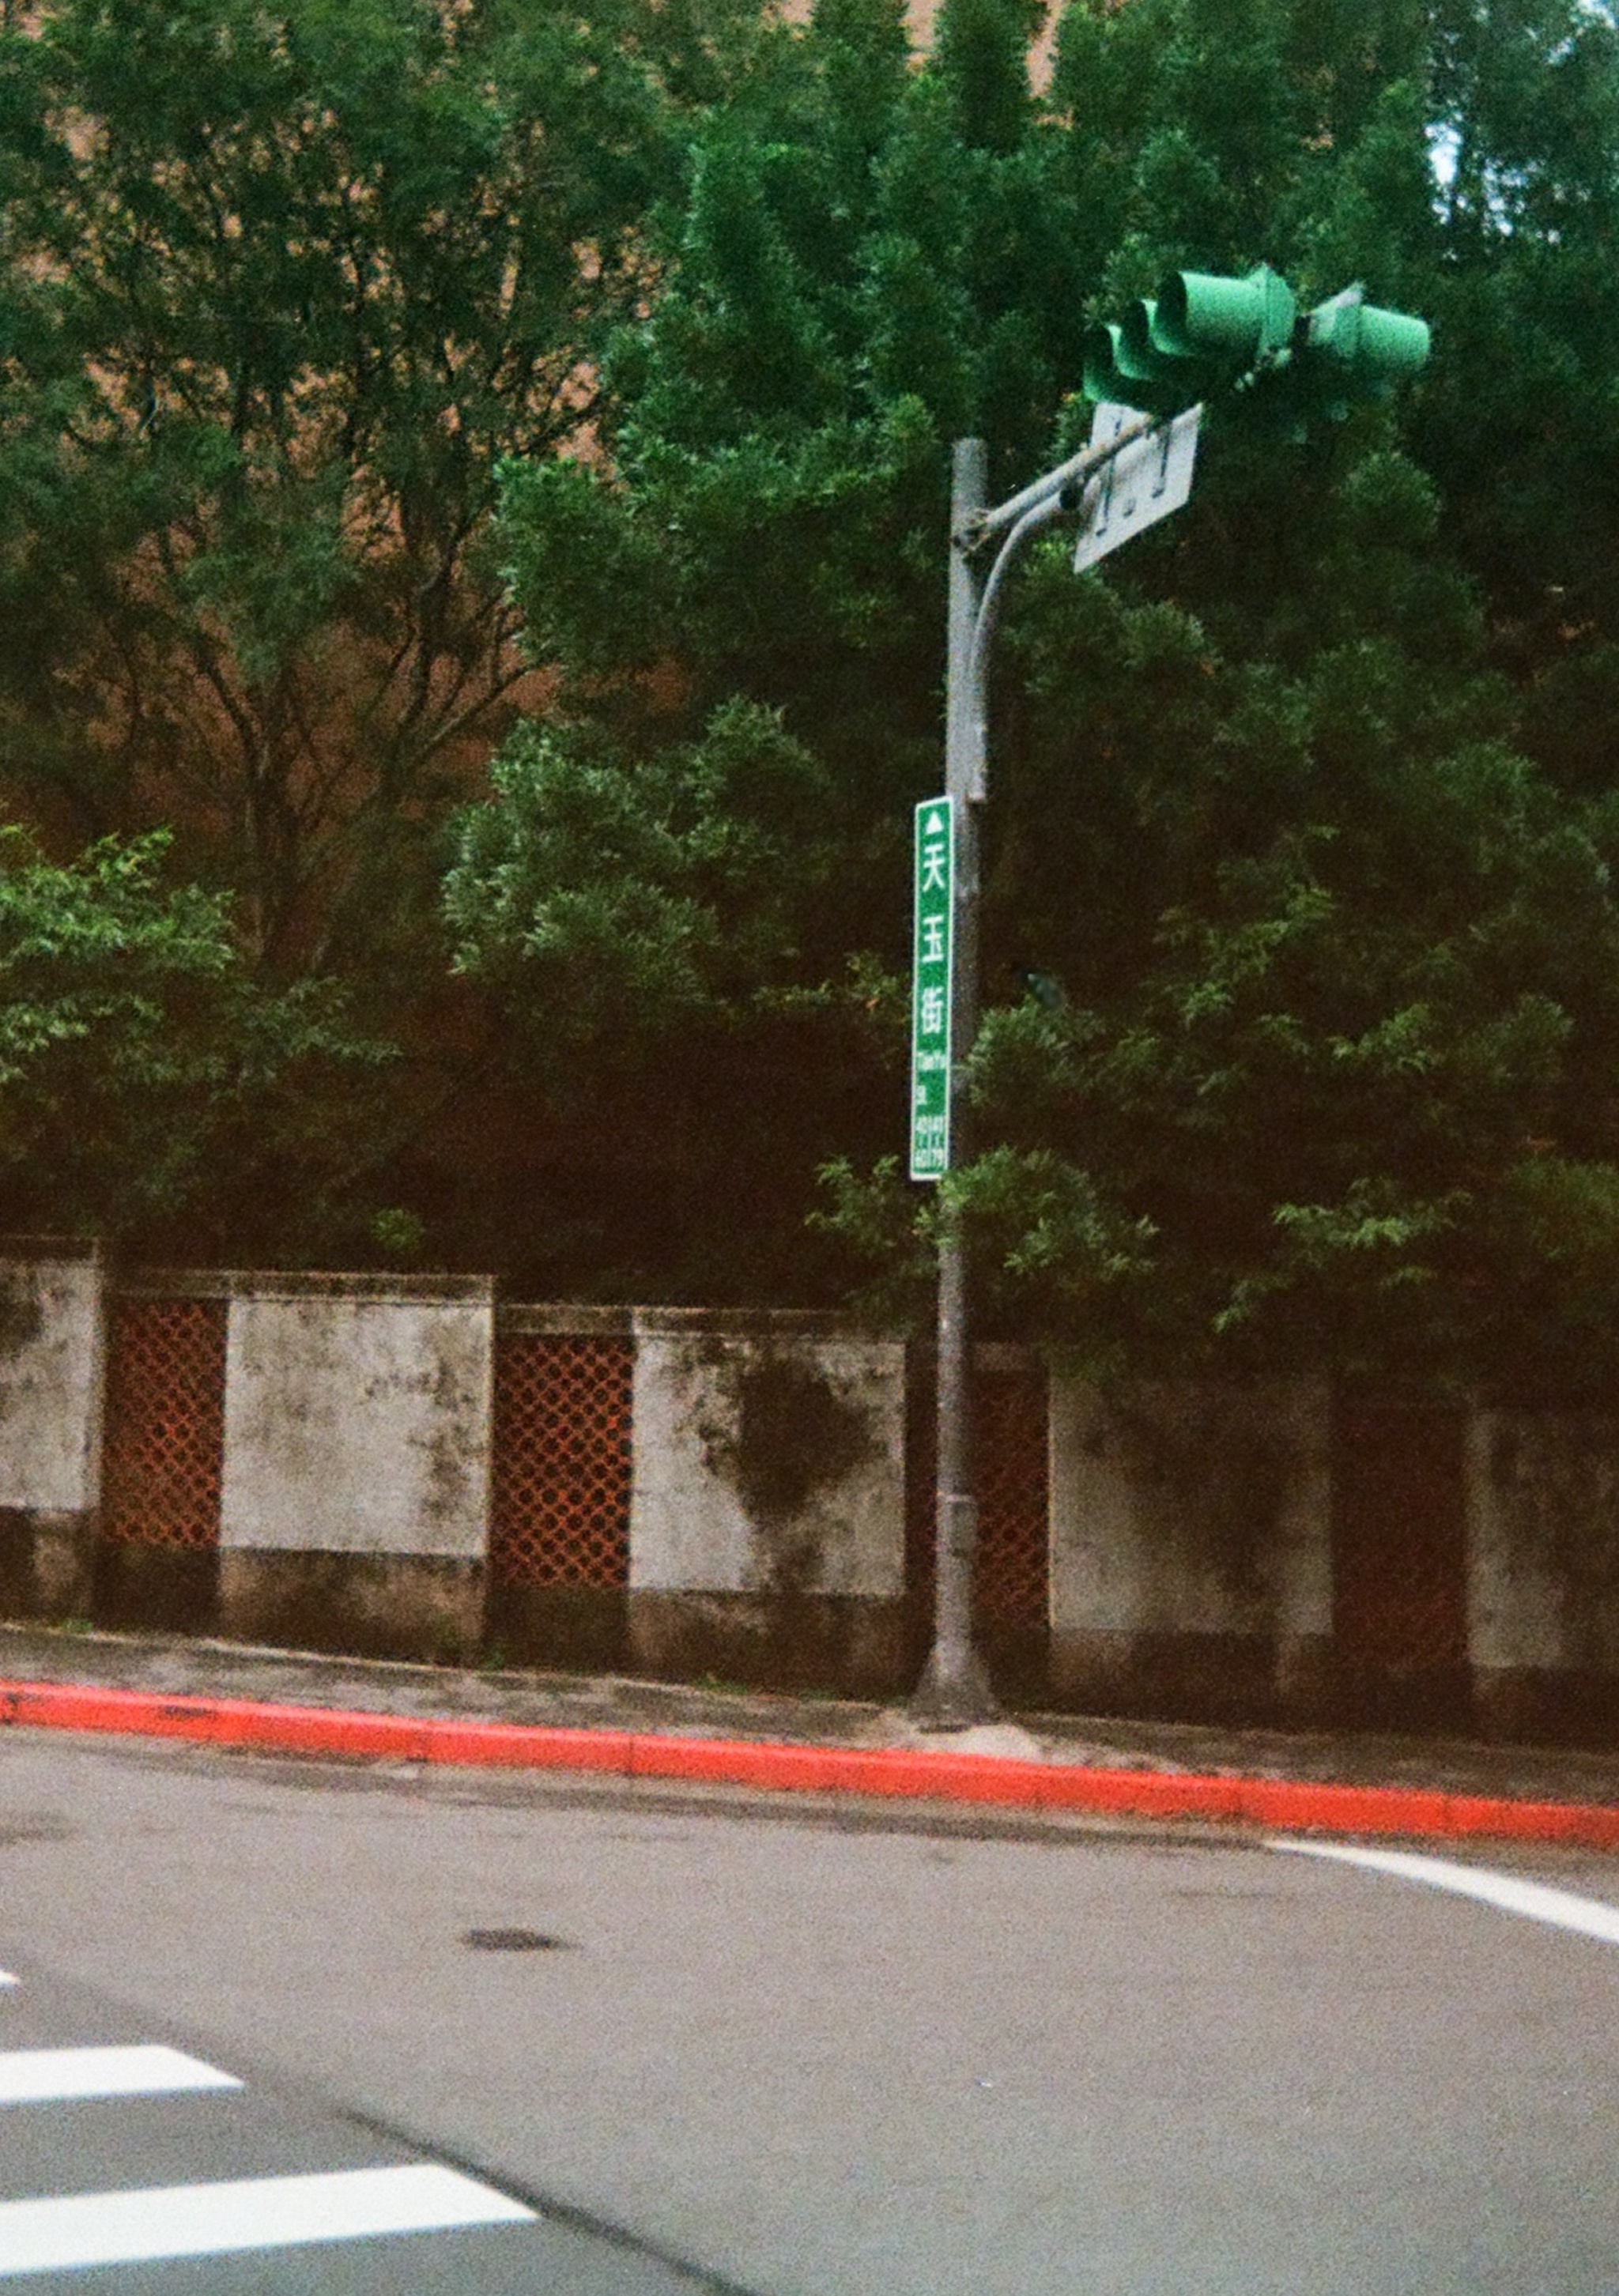 Trees inside of a walled area, traffic lights and road sign.